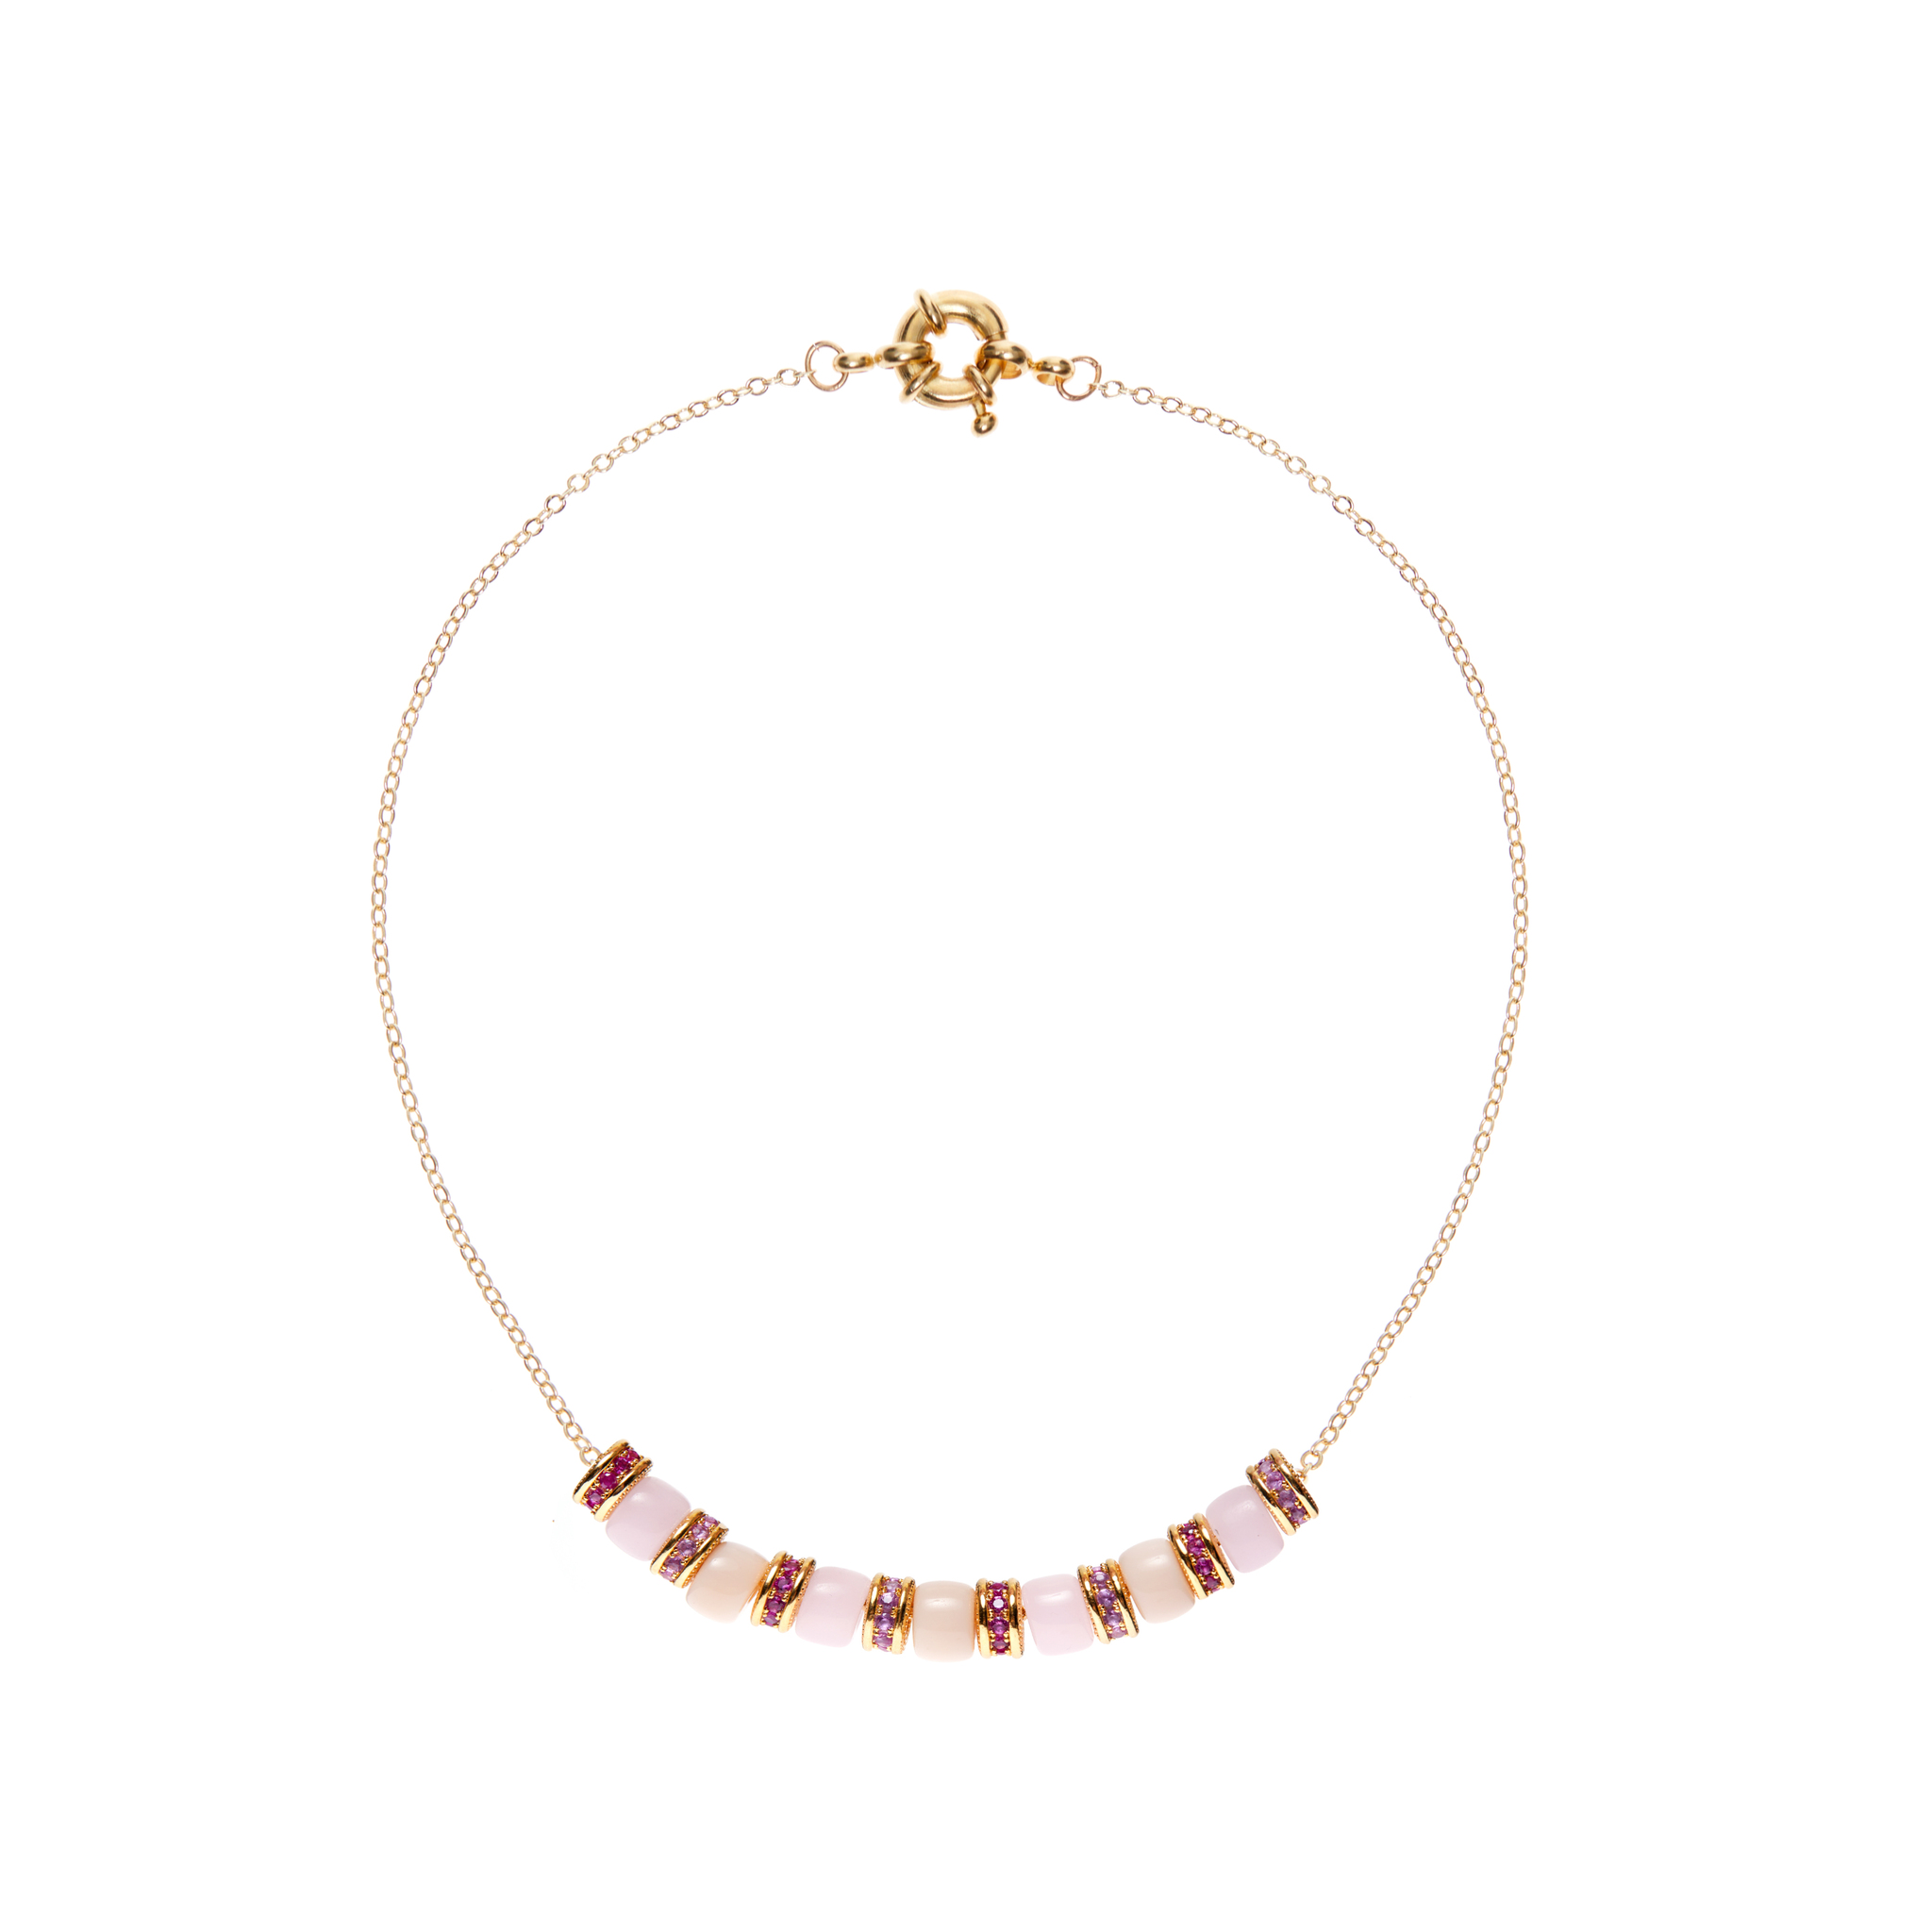 HOLLY JUNE Колье Beads Necklace – Pink holly june колье beads necklace – pink